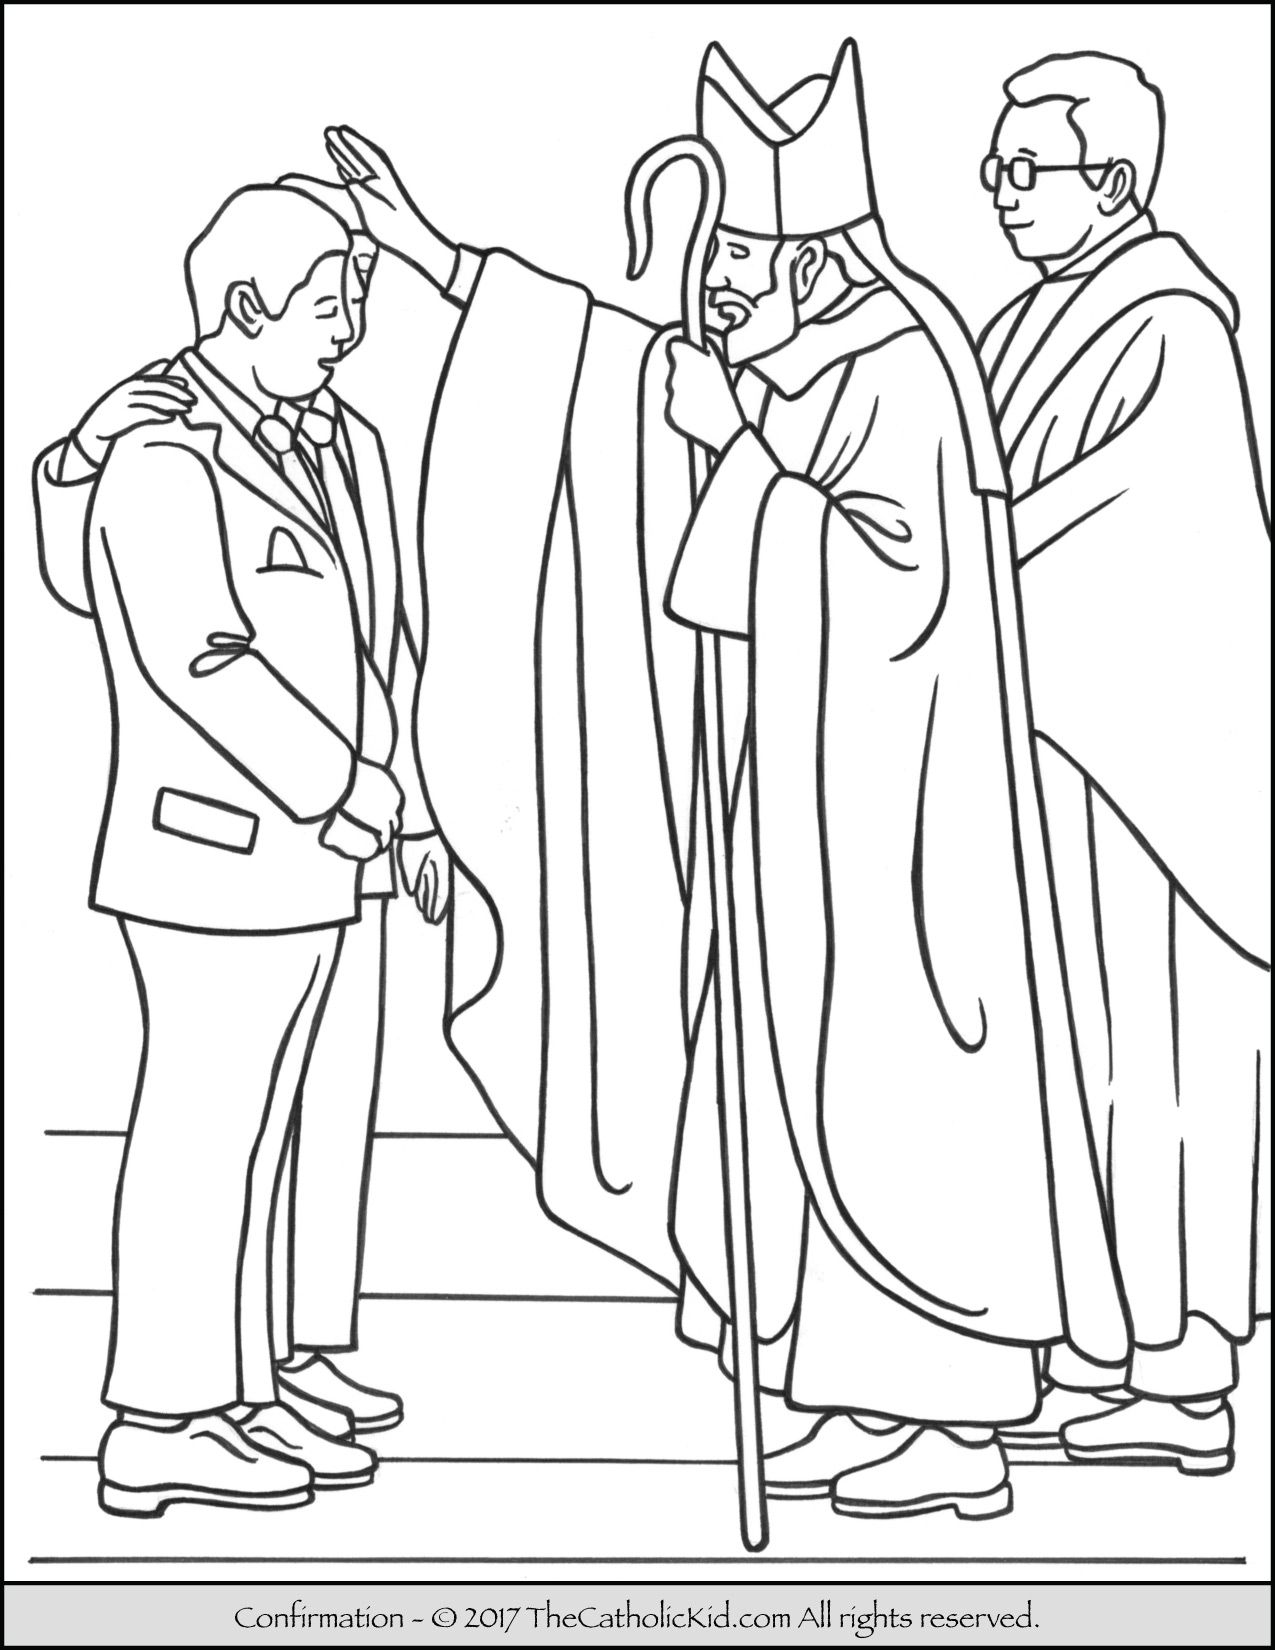 Sacrament of Confirmation Coloring Page. | Catholic coloring, Coloring pages,  Jesus coloring pages